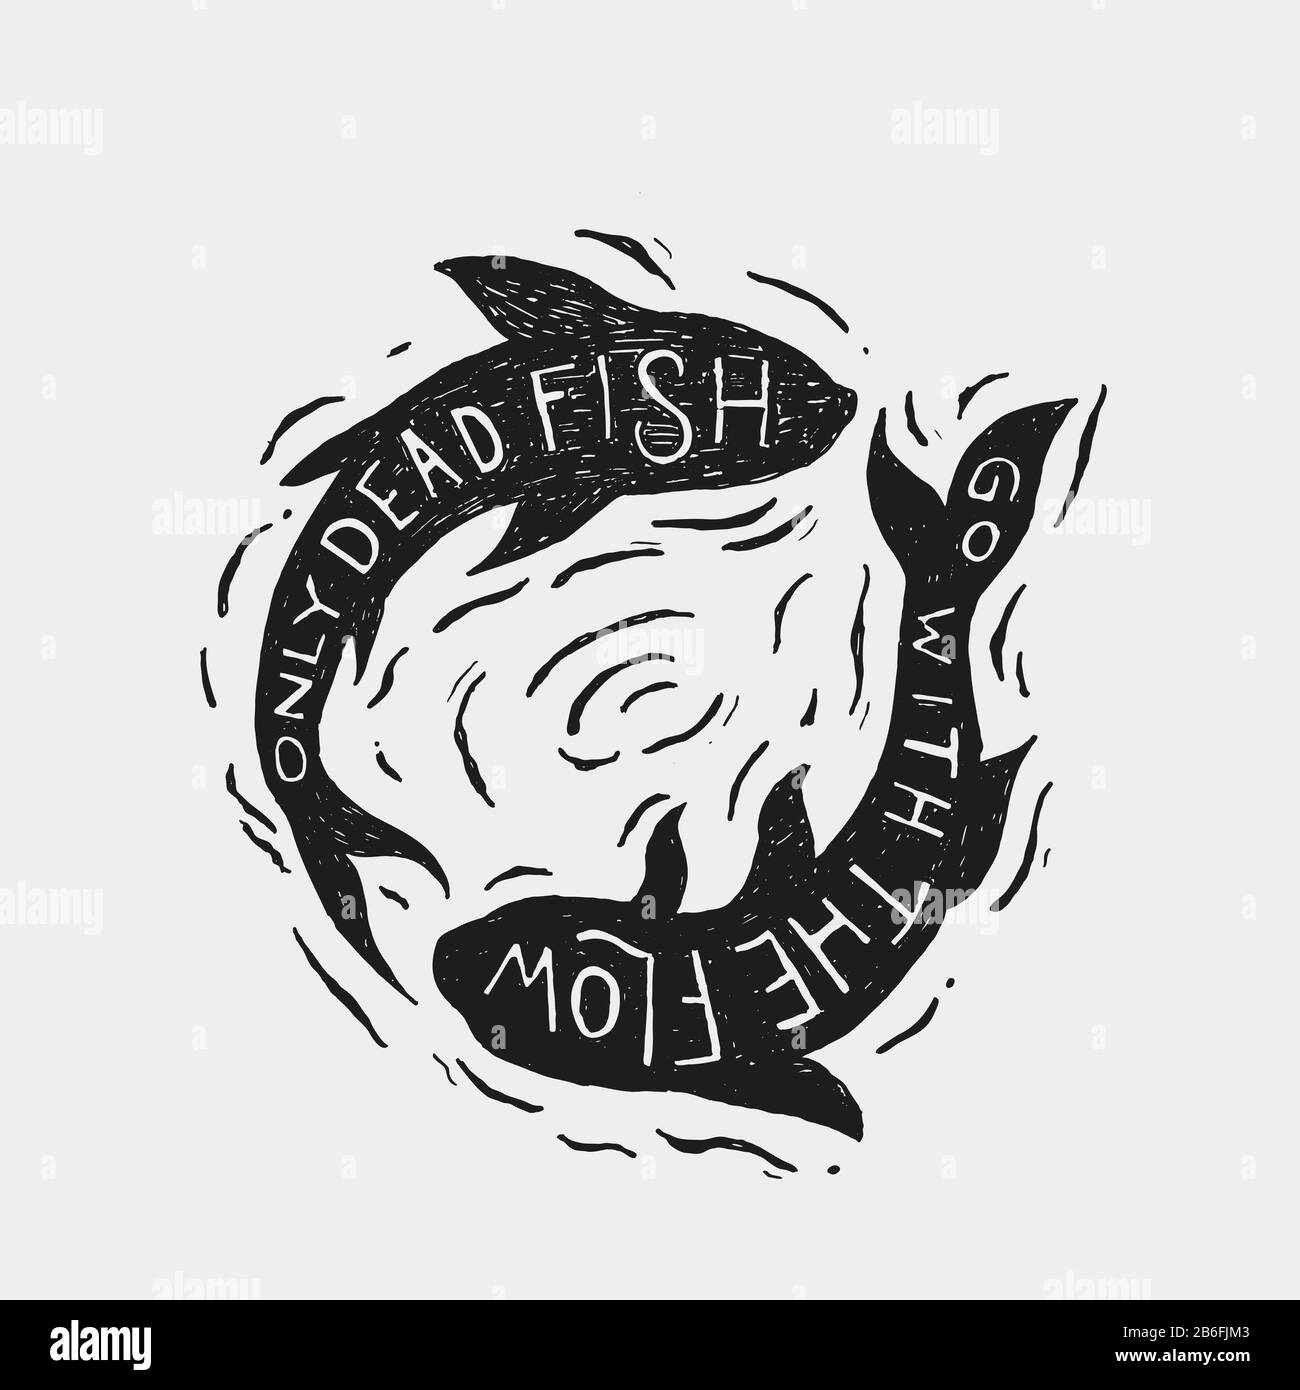 Inspirational yin yang fish lettering quote Stock Photo